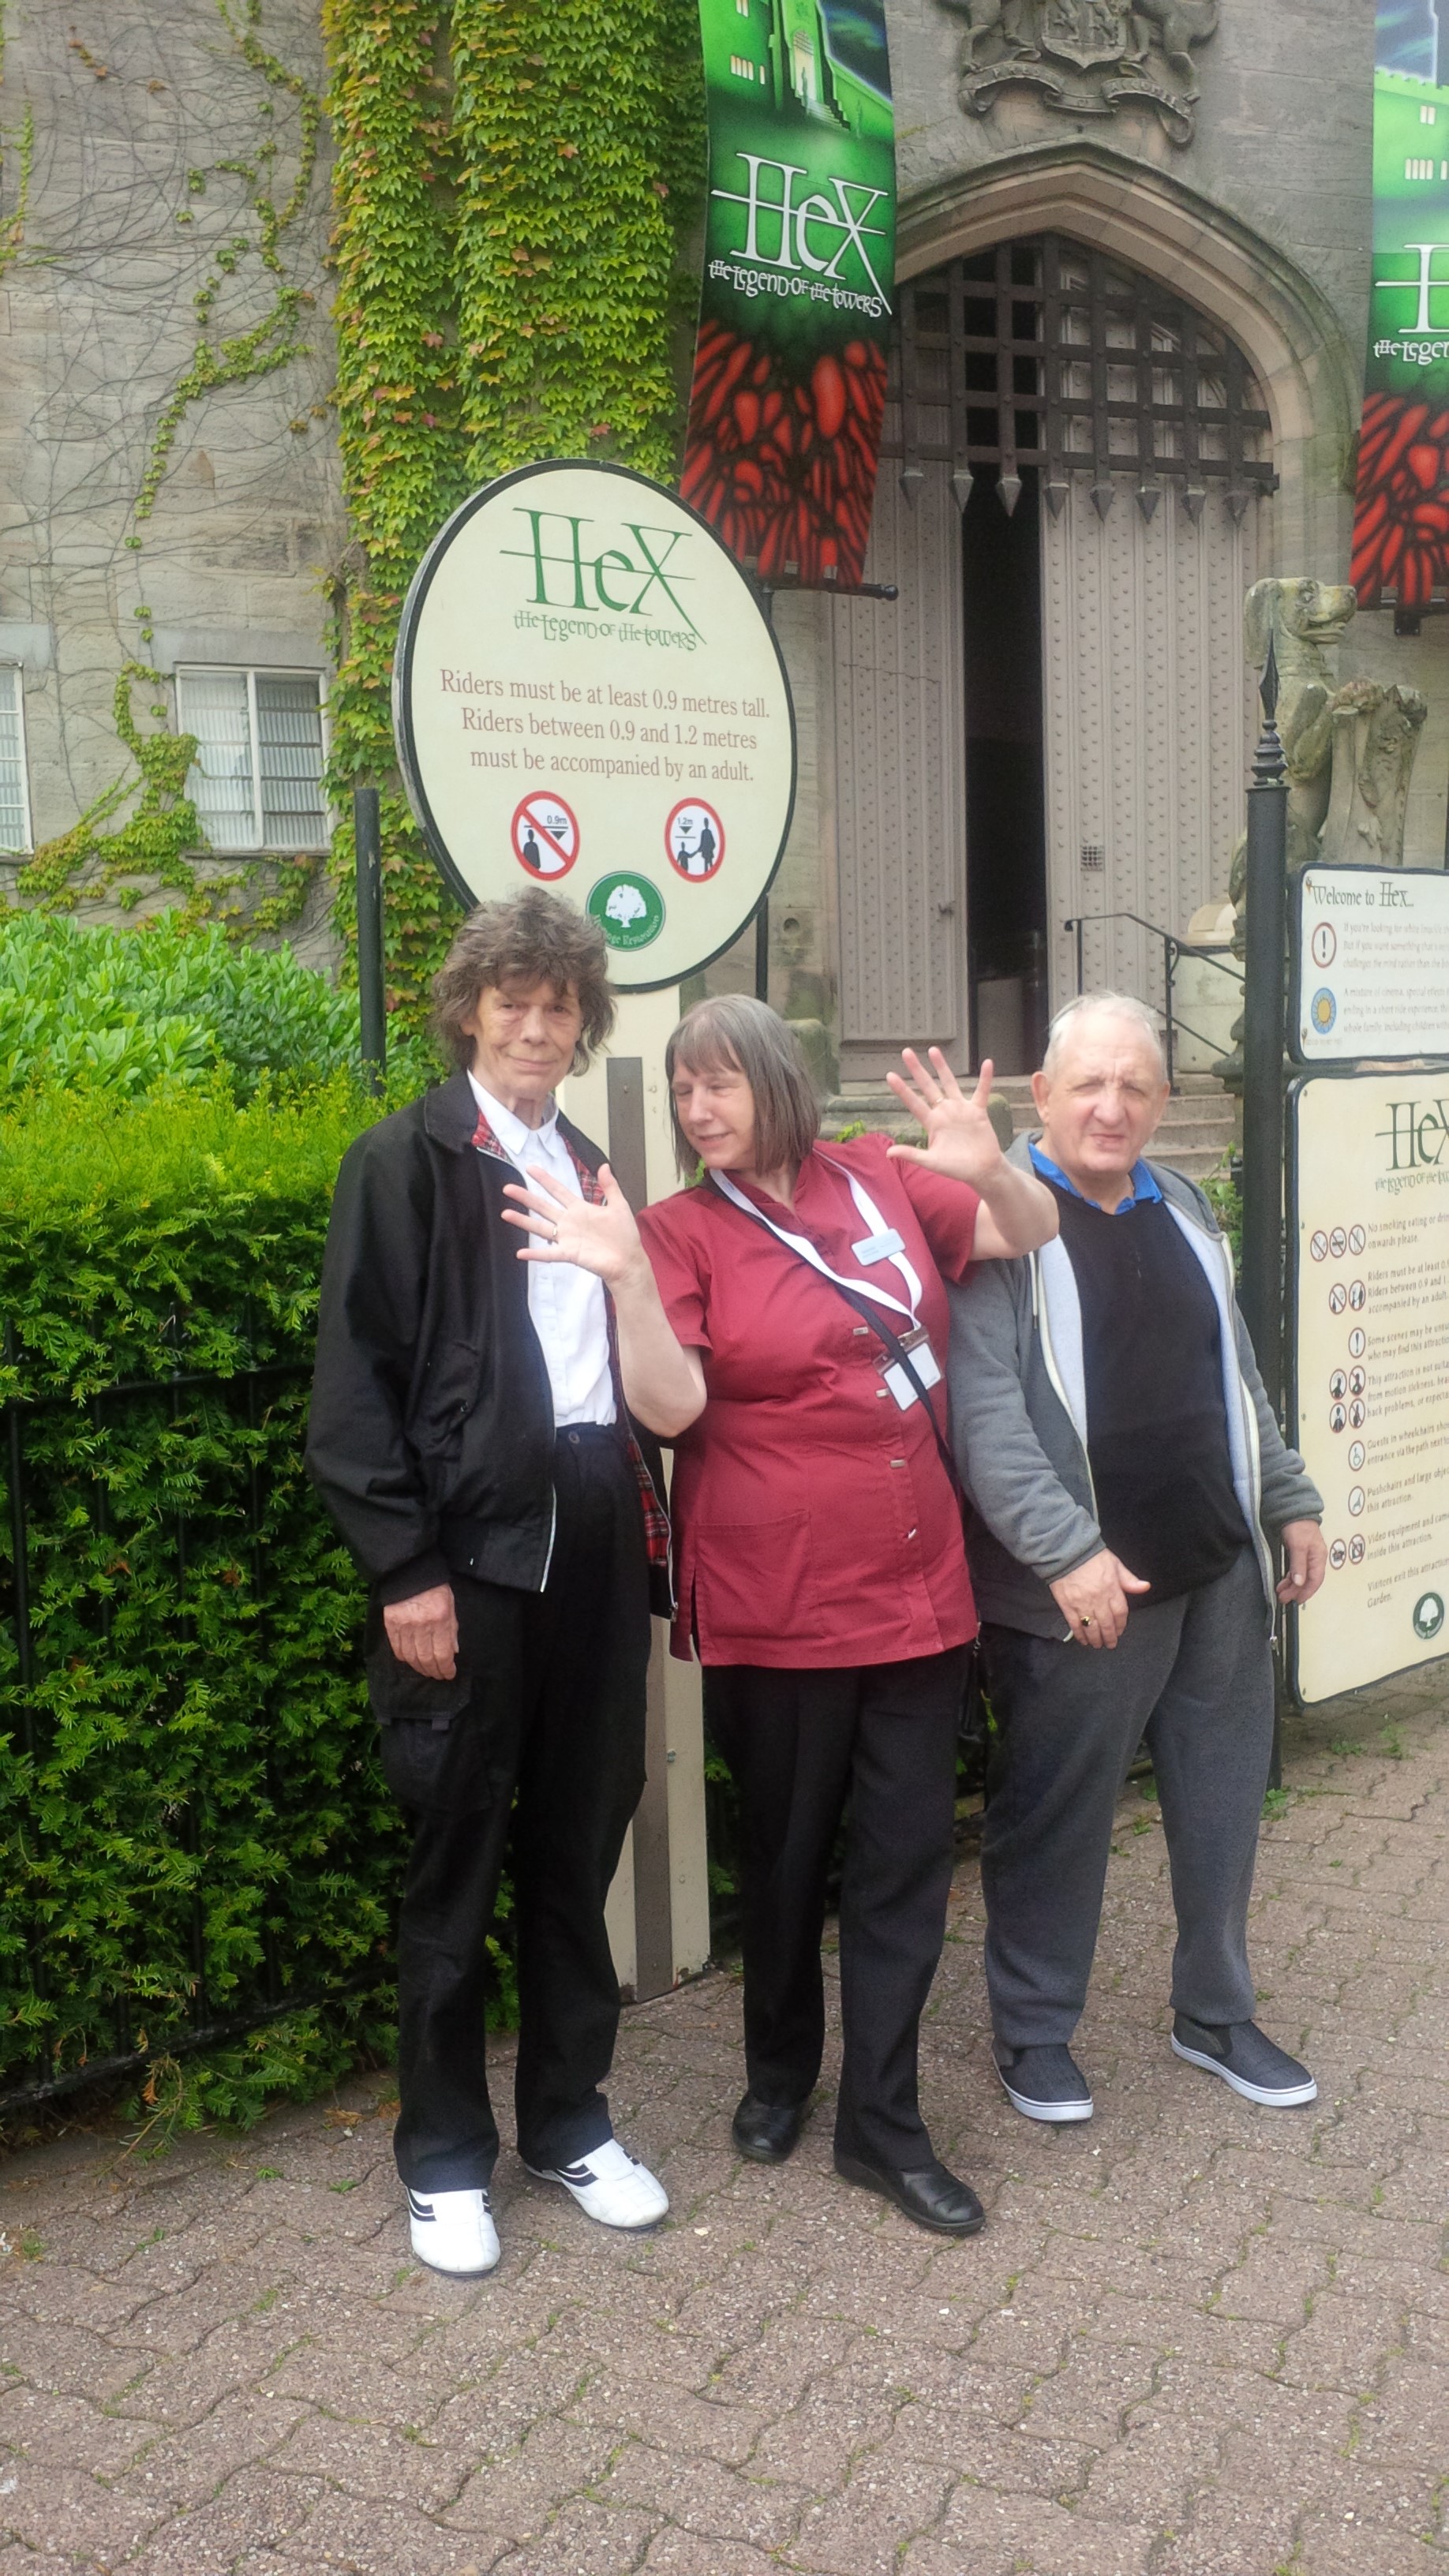 Trip to Alton Towers July 2017: Key Healthcare is dedicated to caring for elderly residents in safe. We have multiple dementia care homes including our care home middlesbrough, our care home St. Helen and care home saltburn. We excel in monitoring and improving care levels.